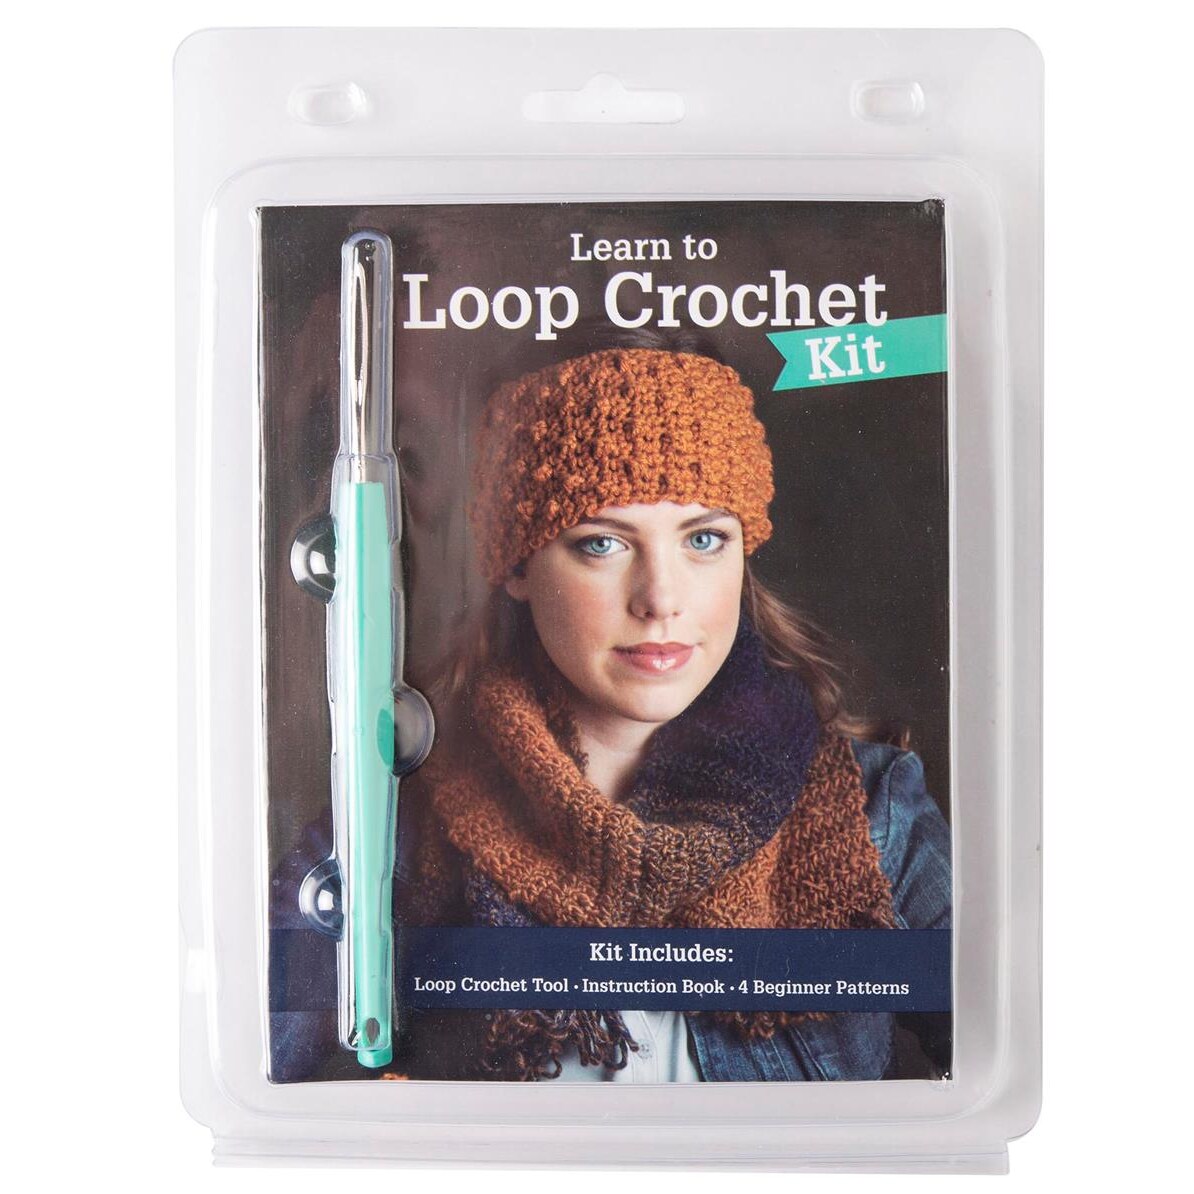 Leisure Arts Learn to Loop Crochet Kit: Crochet set for Beginners Create Knit Stitches with One Tool - Includes one loop crochet tool one instruction book and four beginner patterns.